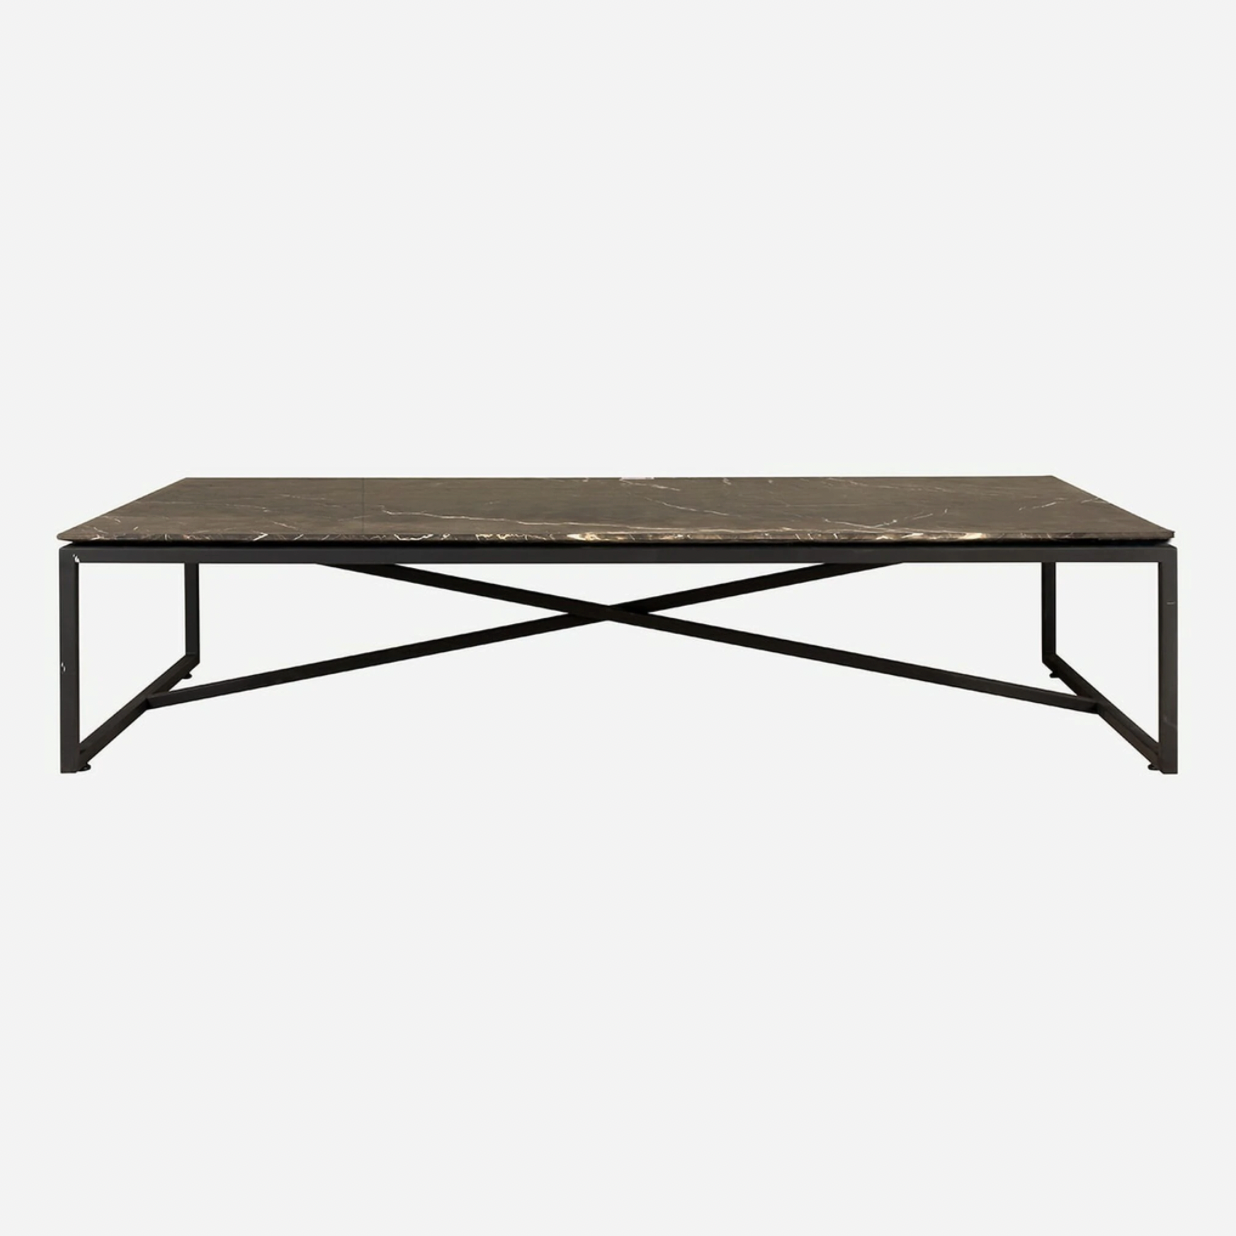 This Andrea Coffee Table has a gorgeous marble top with a geometric metal frame. Place in your living room to bring a sleek, modern feel to the room.   Dimensions: 90"W x 180"L x 40"H Materials: Marble